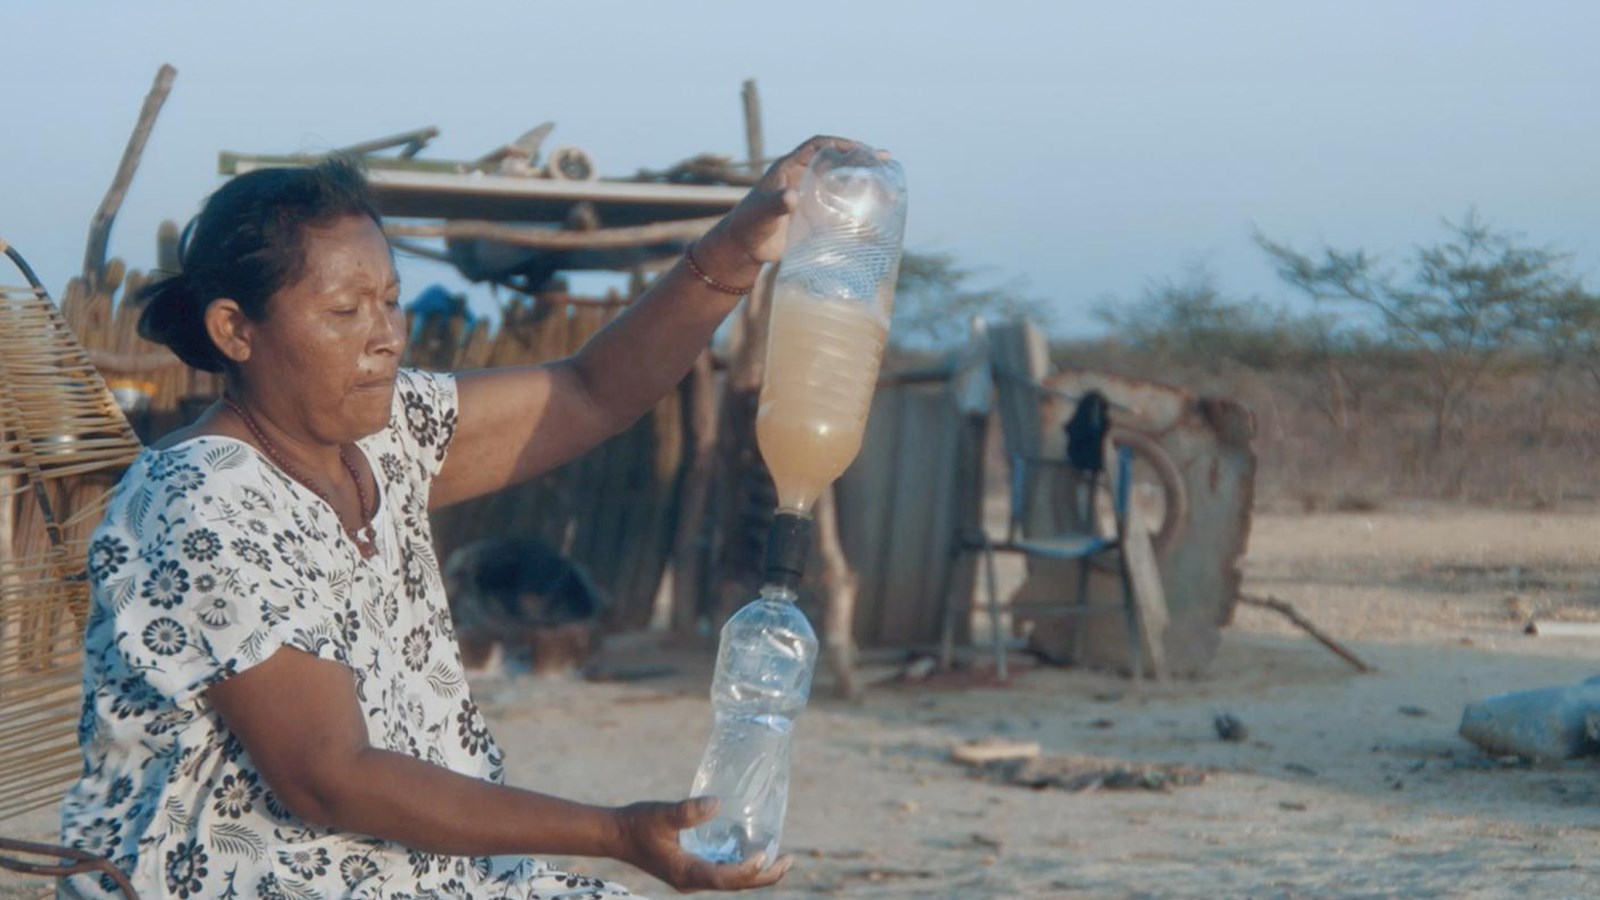 A lady wearing a white patterned dress using a FILSA filter cap to turn dirty water into drinking water